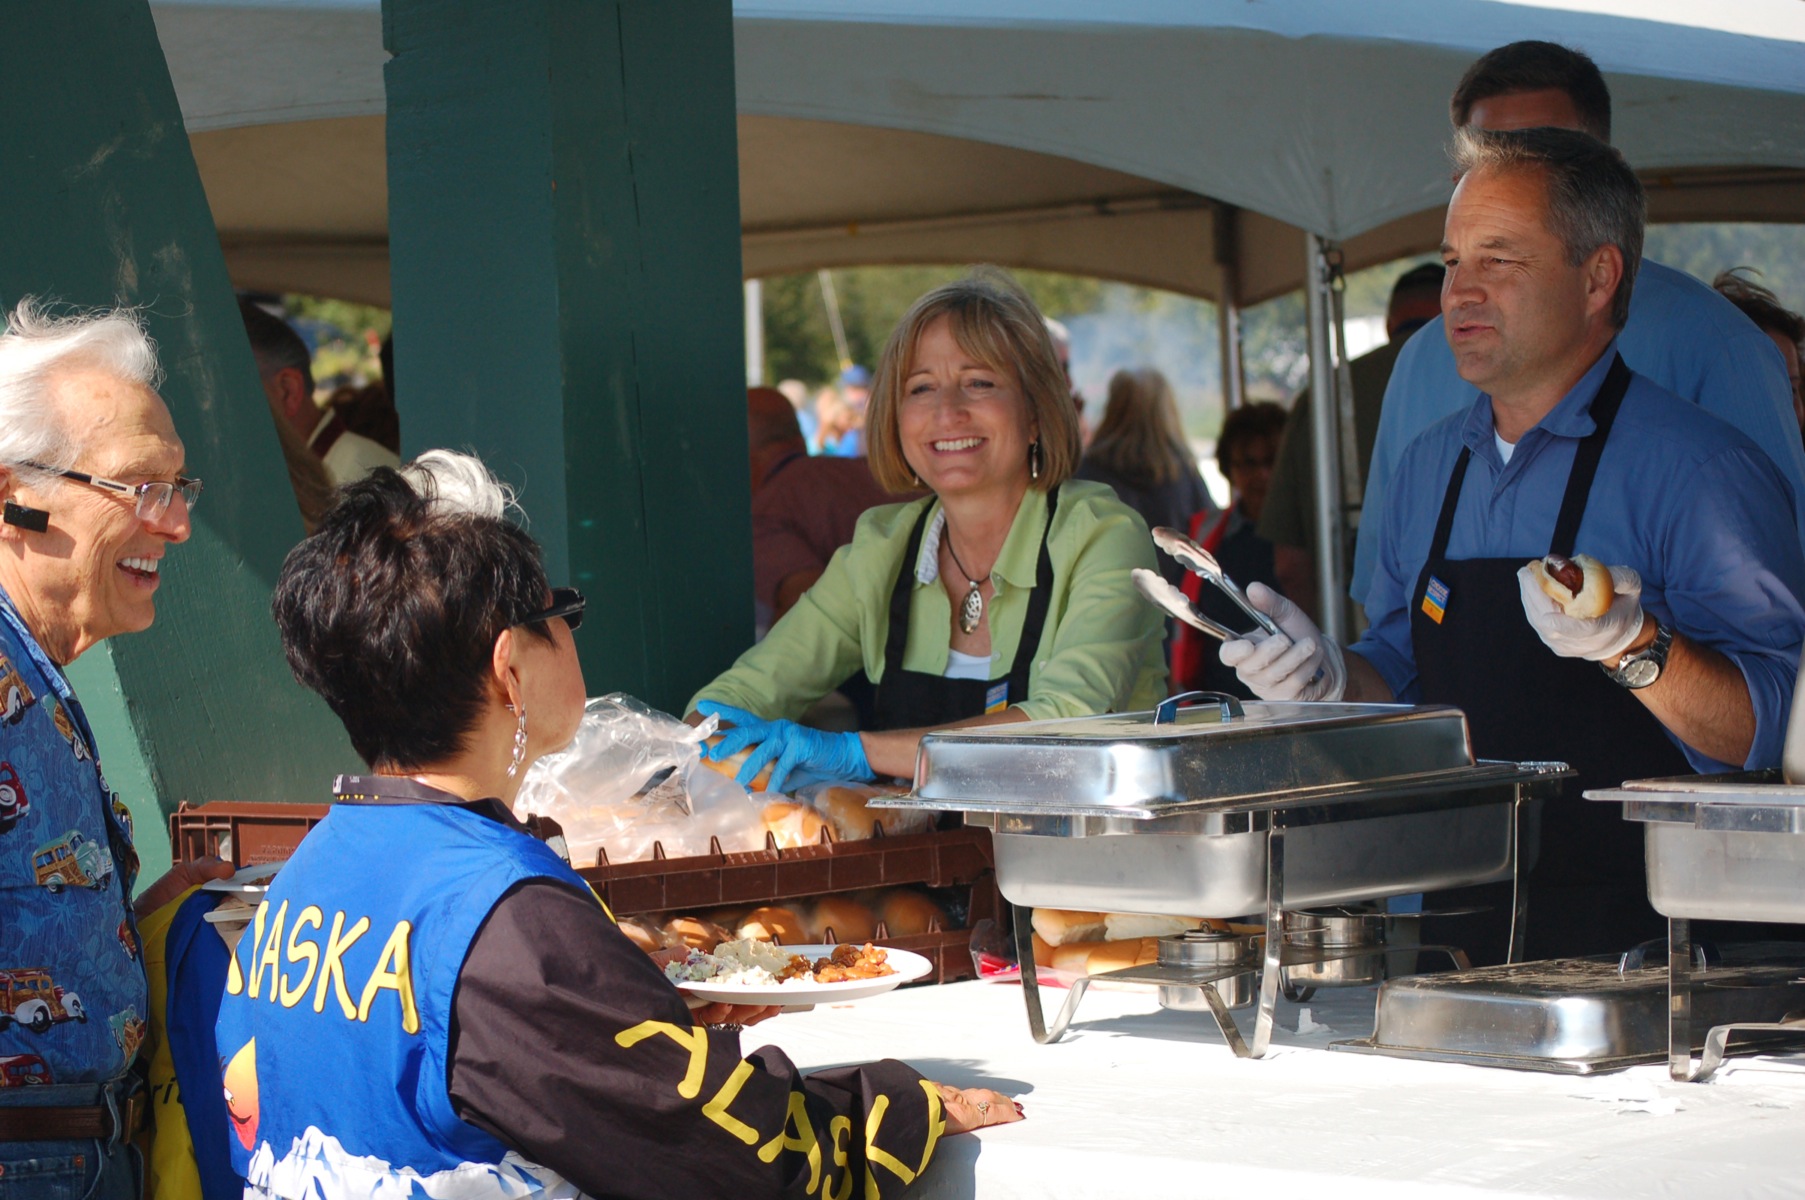 First Lady Sandy Parnell, left, and Gov. Sean Parnell, right, serve food to Thomas and Joanne Munger at the Governor's Picnic in July.-Photo by Michael Armstrong, Homer News